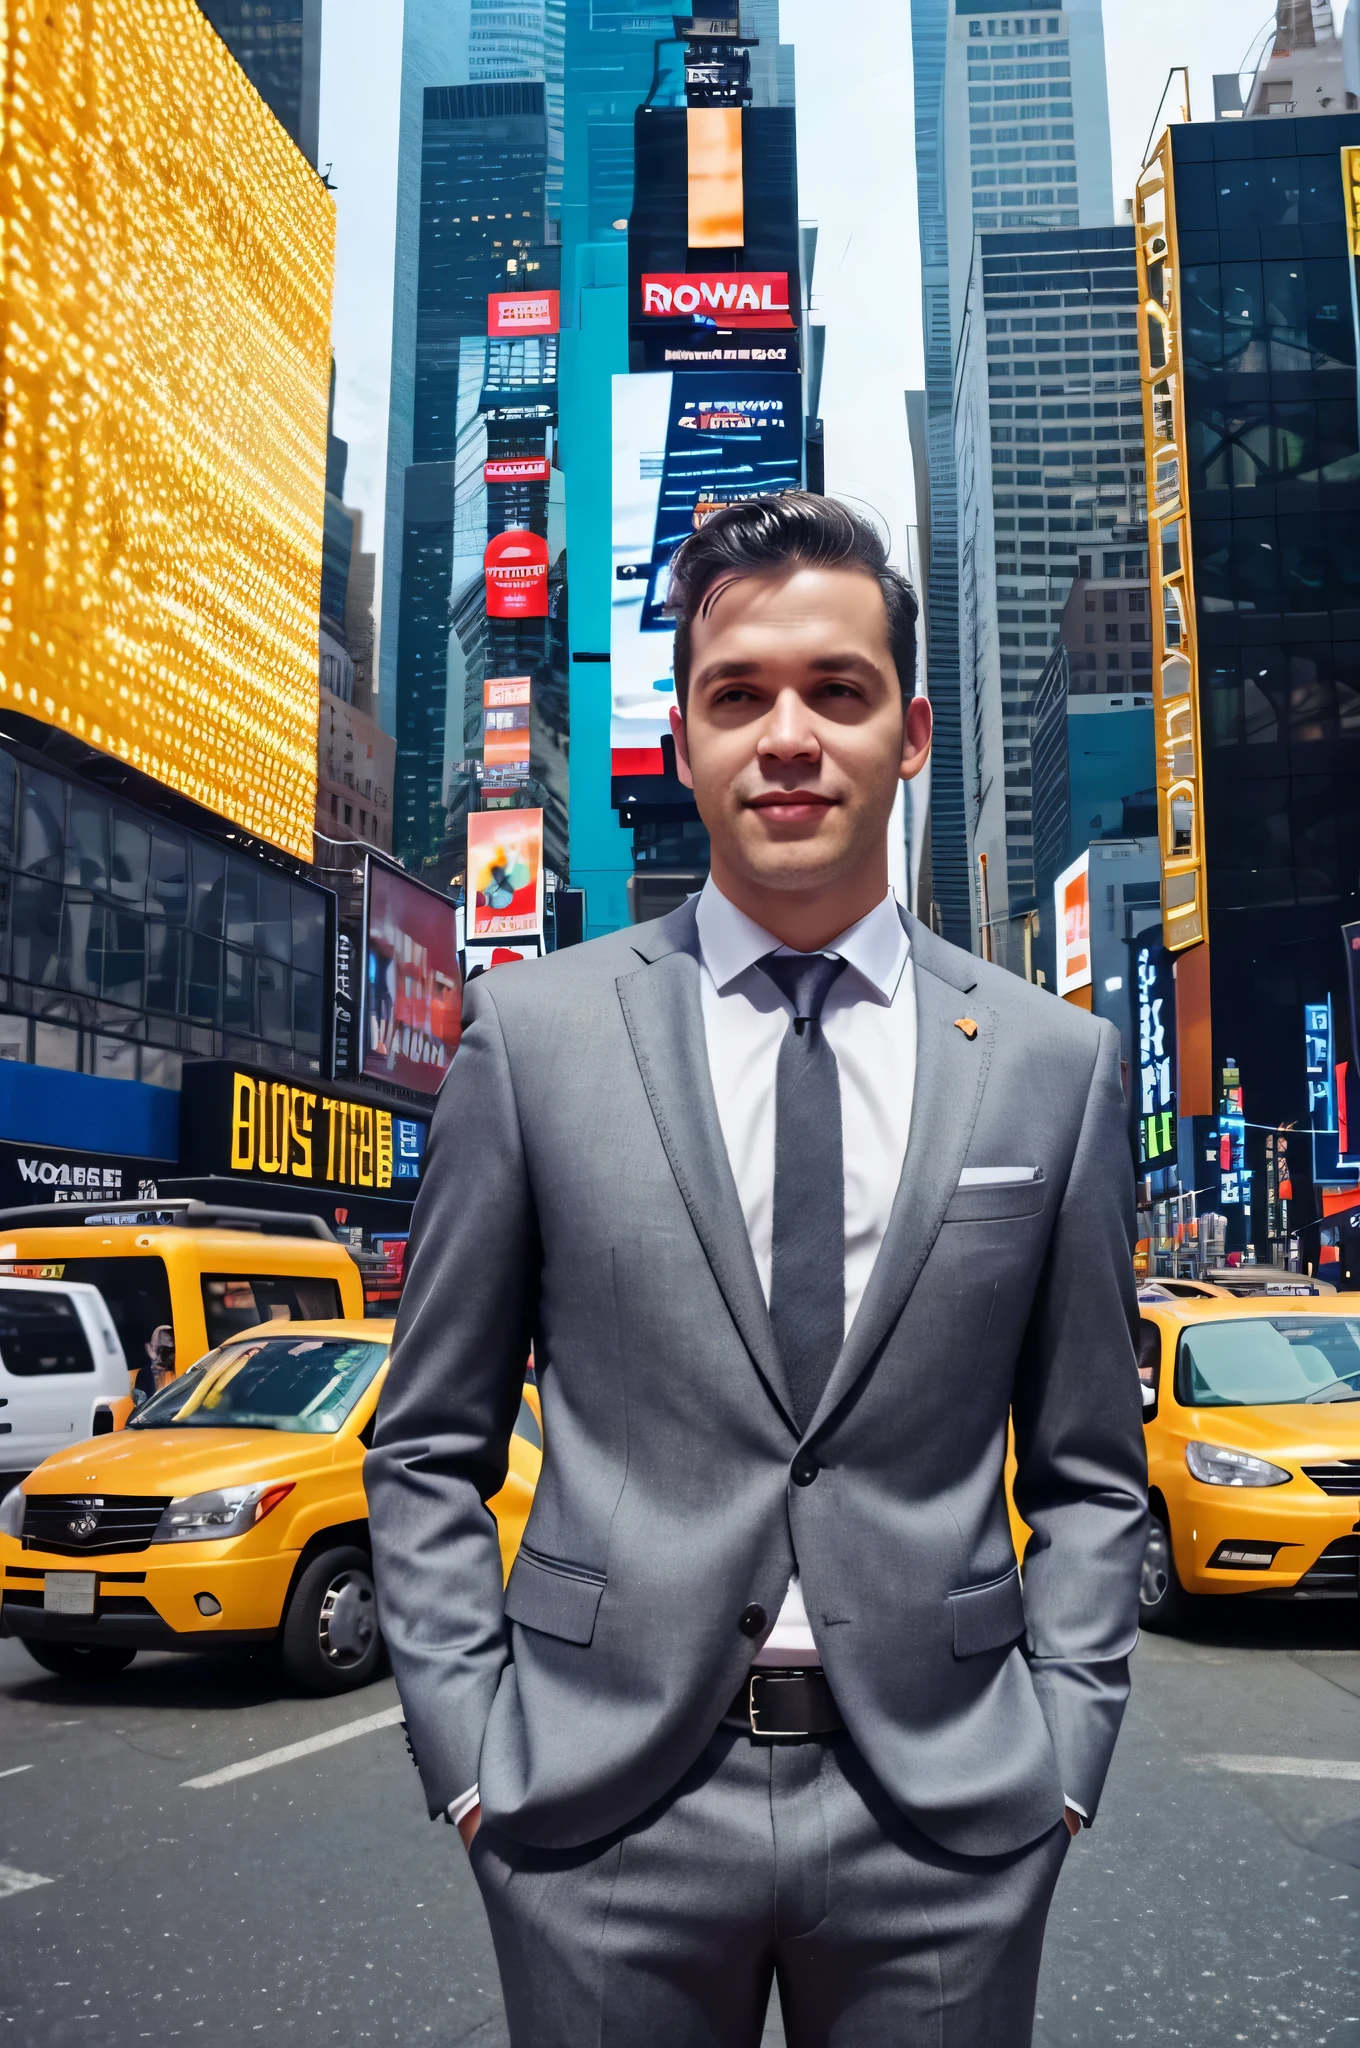 male self portrait wearing casual suit, holding coffee cup , background outdoor at times square new york